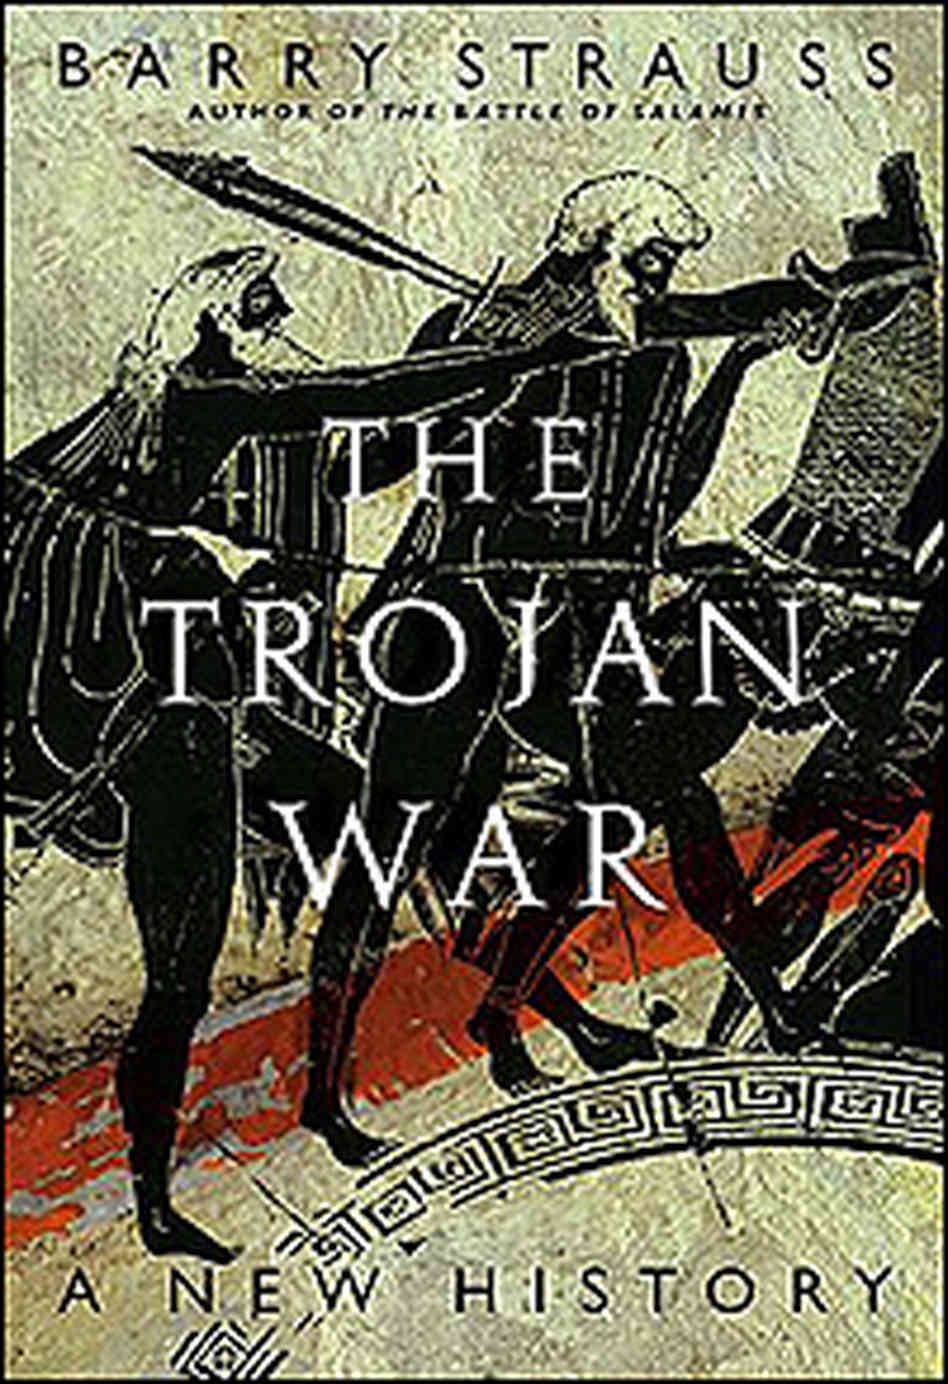 what was the reason for the trojan war